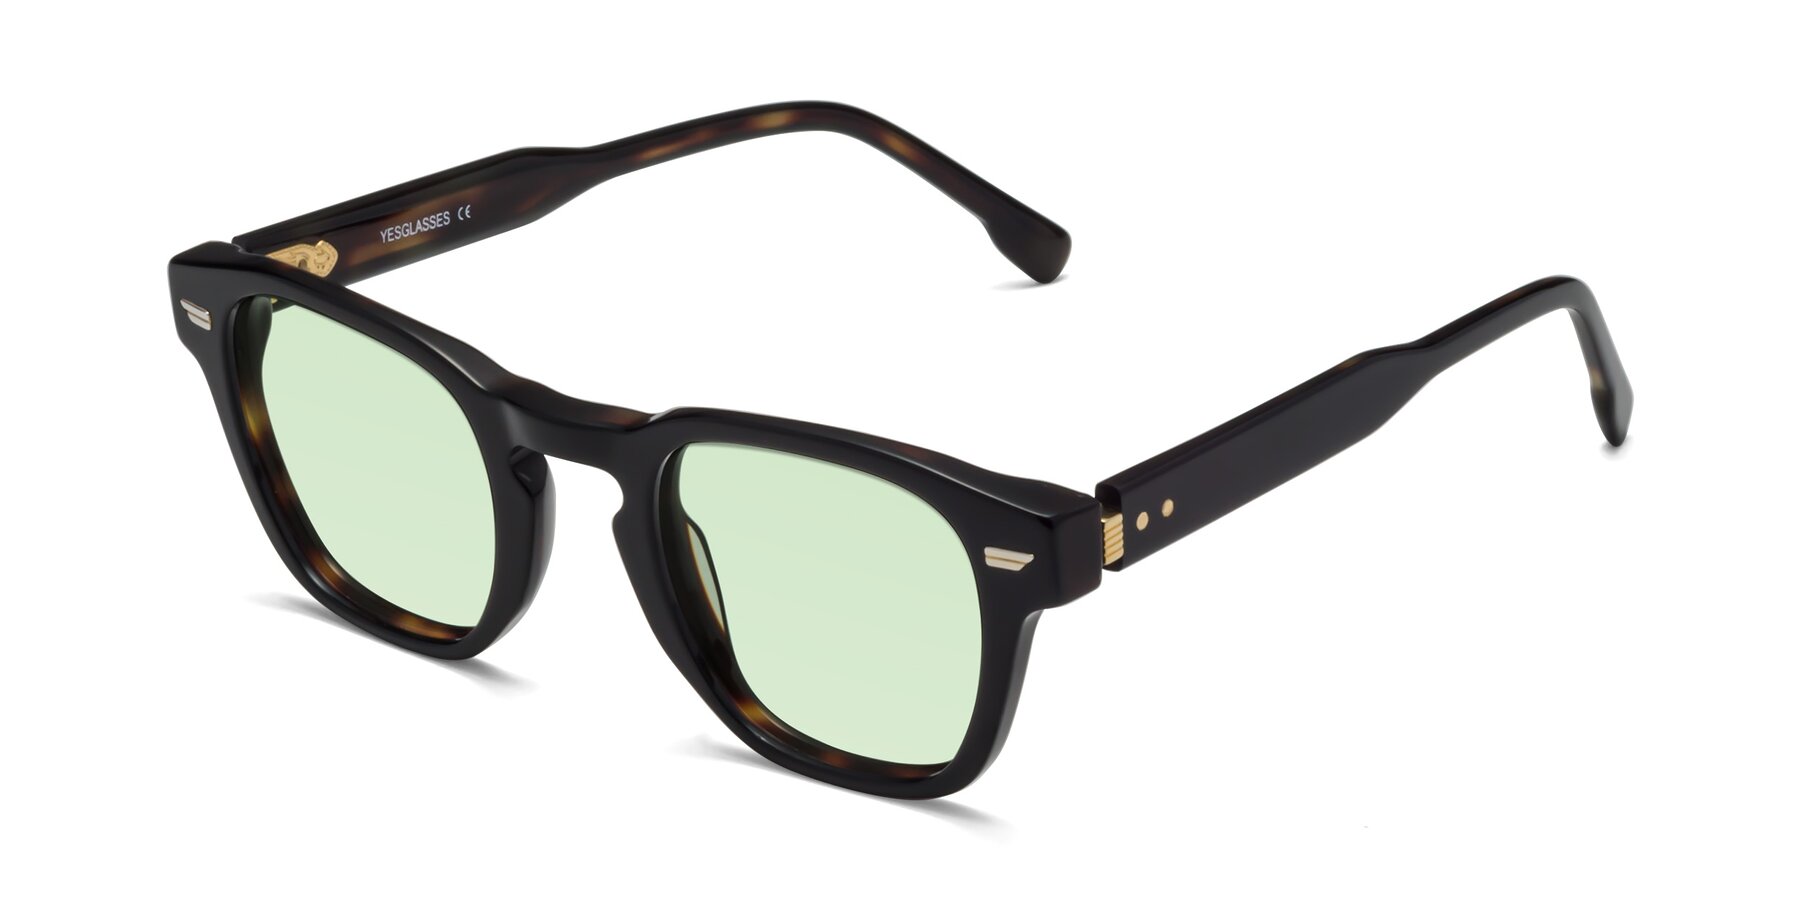 Angle of 1421 in Black-Tortoise with Light Green Tinted Lenses